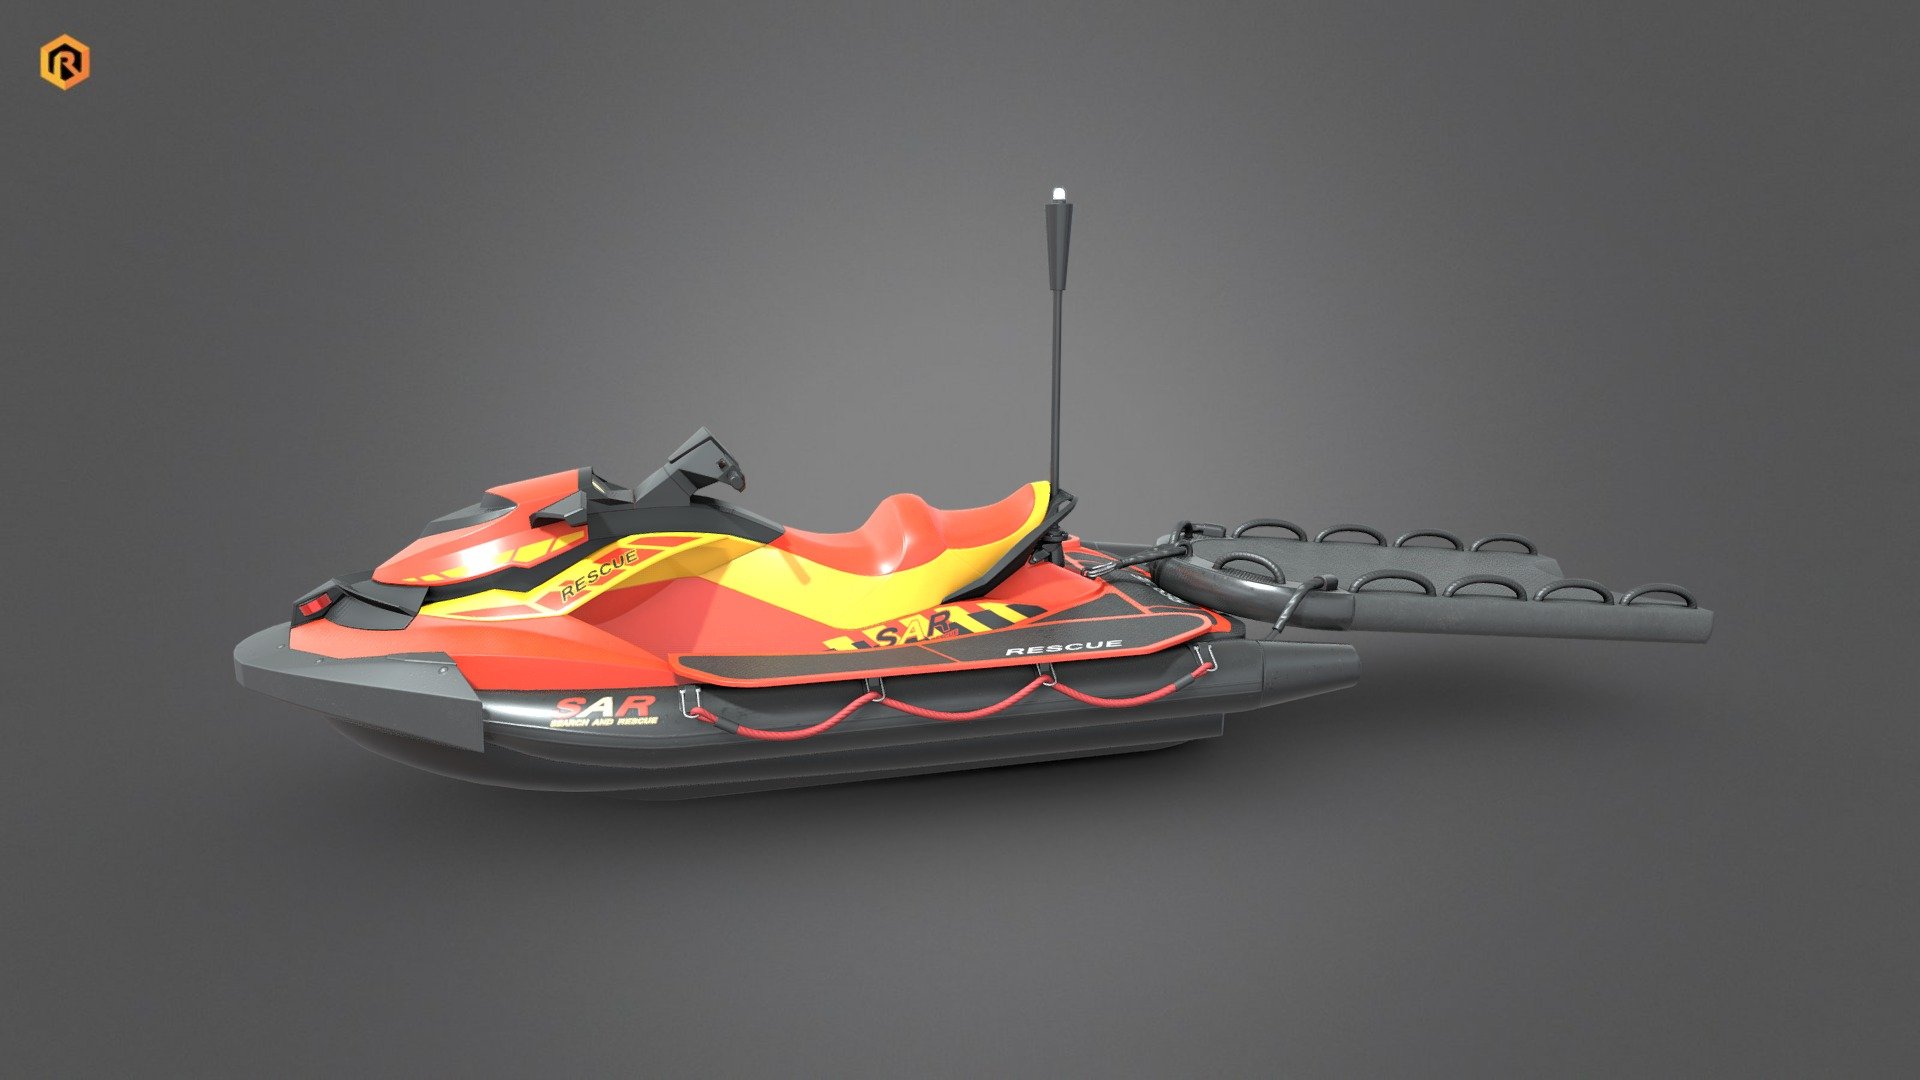 Low-poly PBR 3D model of Lifeguard Watercraft.

This asset is divided into several parts so you can get several variations of this water vehicle.

This model was based on a high-end watercraft and now it is designed exclusively for search and rescue professionals.  

This 3D model is best for use in games and other VR / AR, real-time applications such as Unity or Unreal Engine. It can also be rendered in Blender (ex Cycles) or Vray as the model is equipped with all required PBR textures.   

Technical details:




4 PBR textures sets (Main Body, Emission, Alpha, Addons)

26666 Triangles.

22617 Vertices.

The model is divided into several objects to make it easier to configure different variants of the vehicle.

Lot of additional file formats included (Blender, Unity, UE4 Maya etc.)  

More file formats are available in additional zip file on product page.

Please feel free to contact me if you have any questions or need any support for this asset.

Support e-mail: support@rescue3d.com - Lifeguard Watercraft - Buy Royalty Free 3D model by Rescue3D Assets (@rescue3d) 3d model